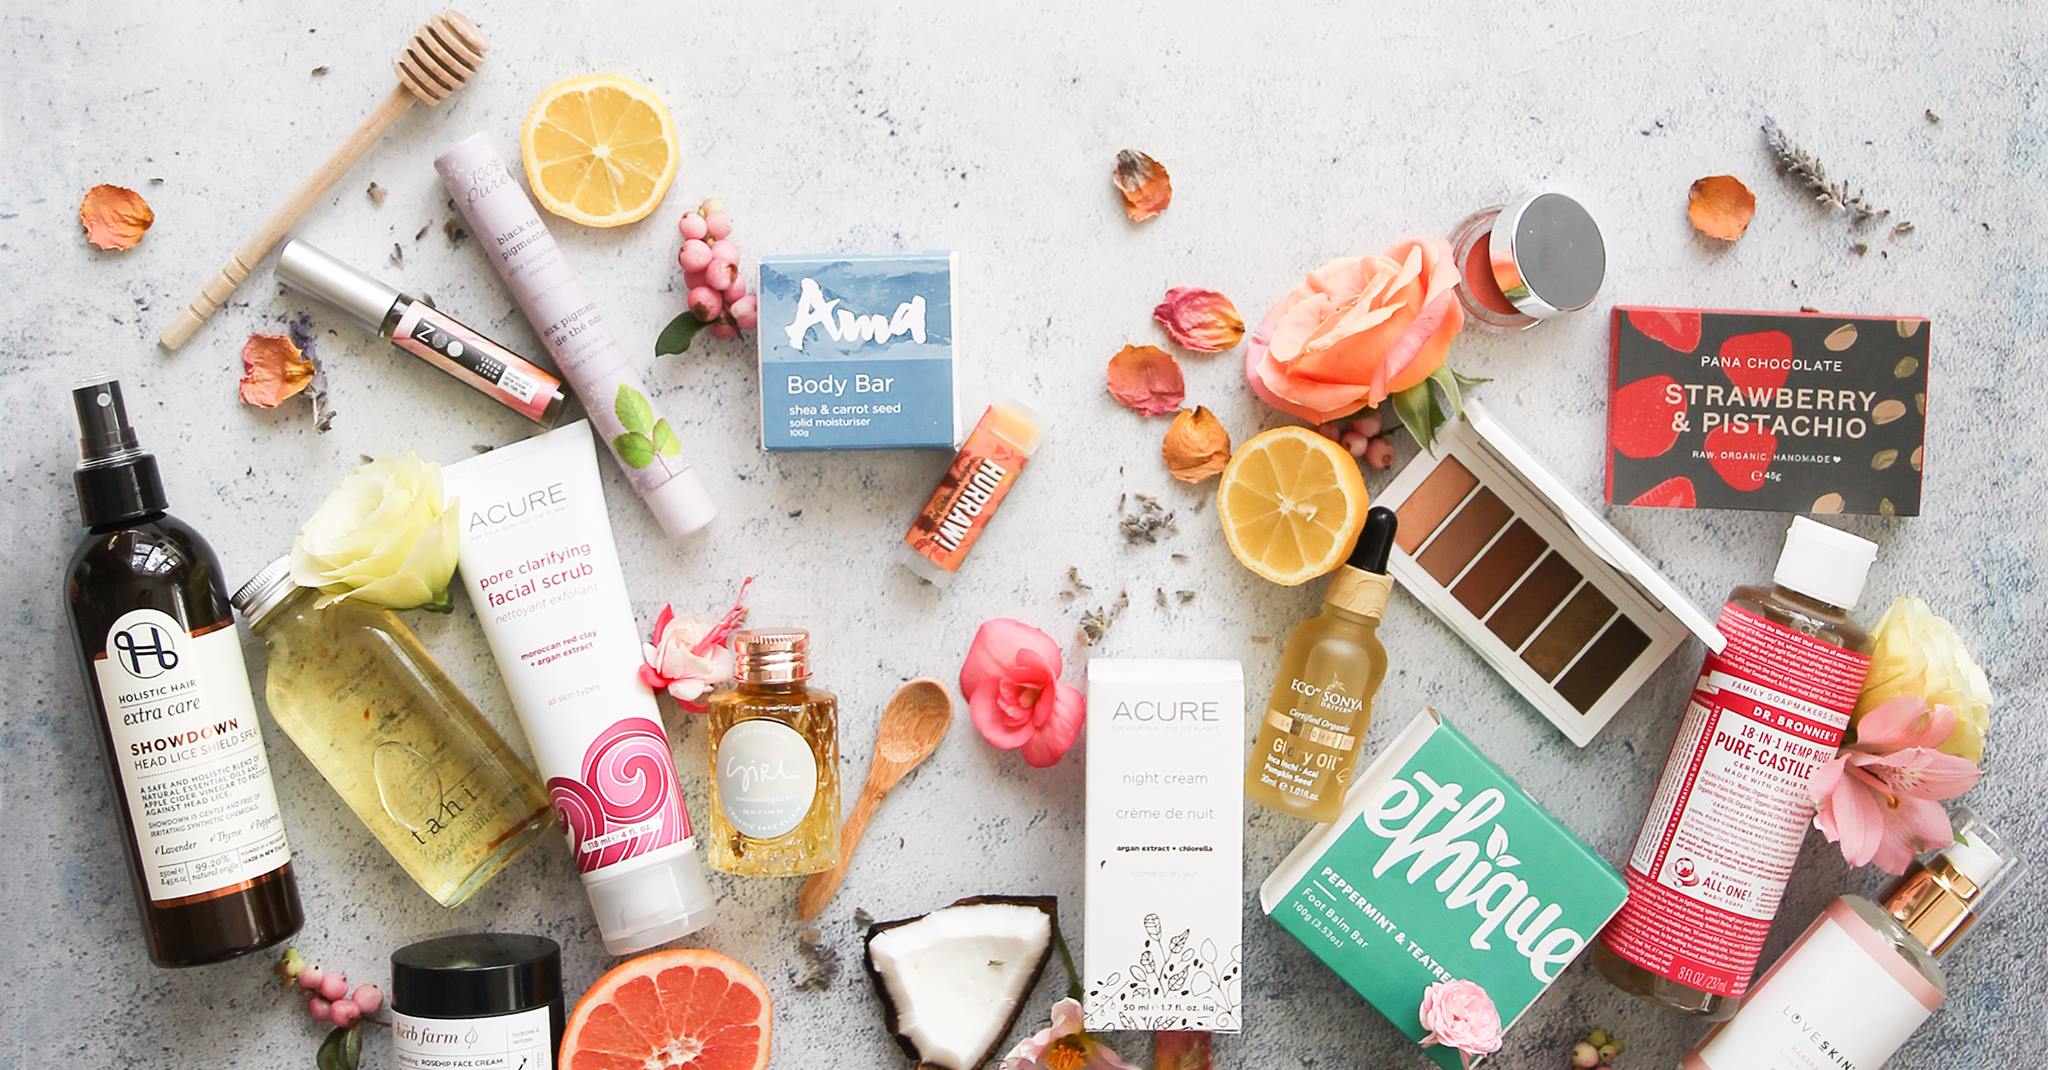 Oh Natural: The Online Store That You Need to Bookmark